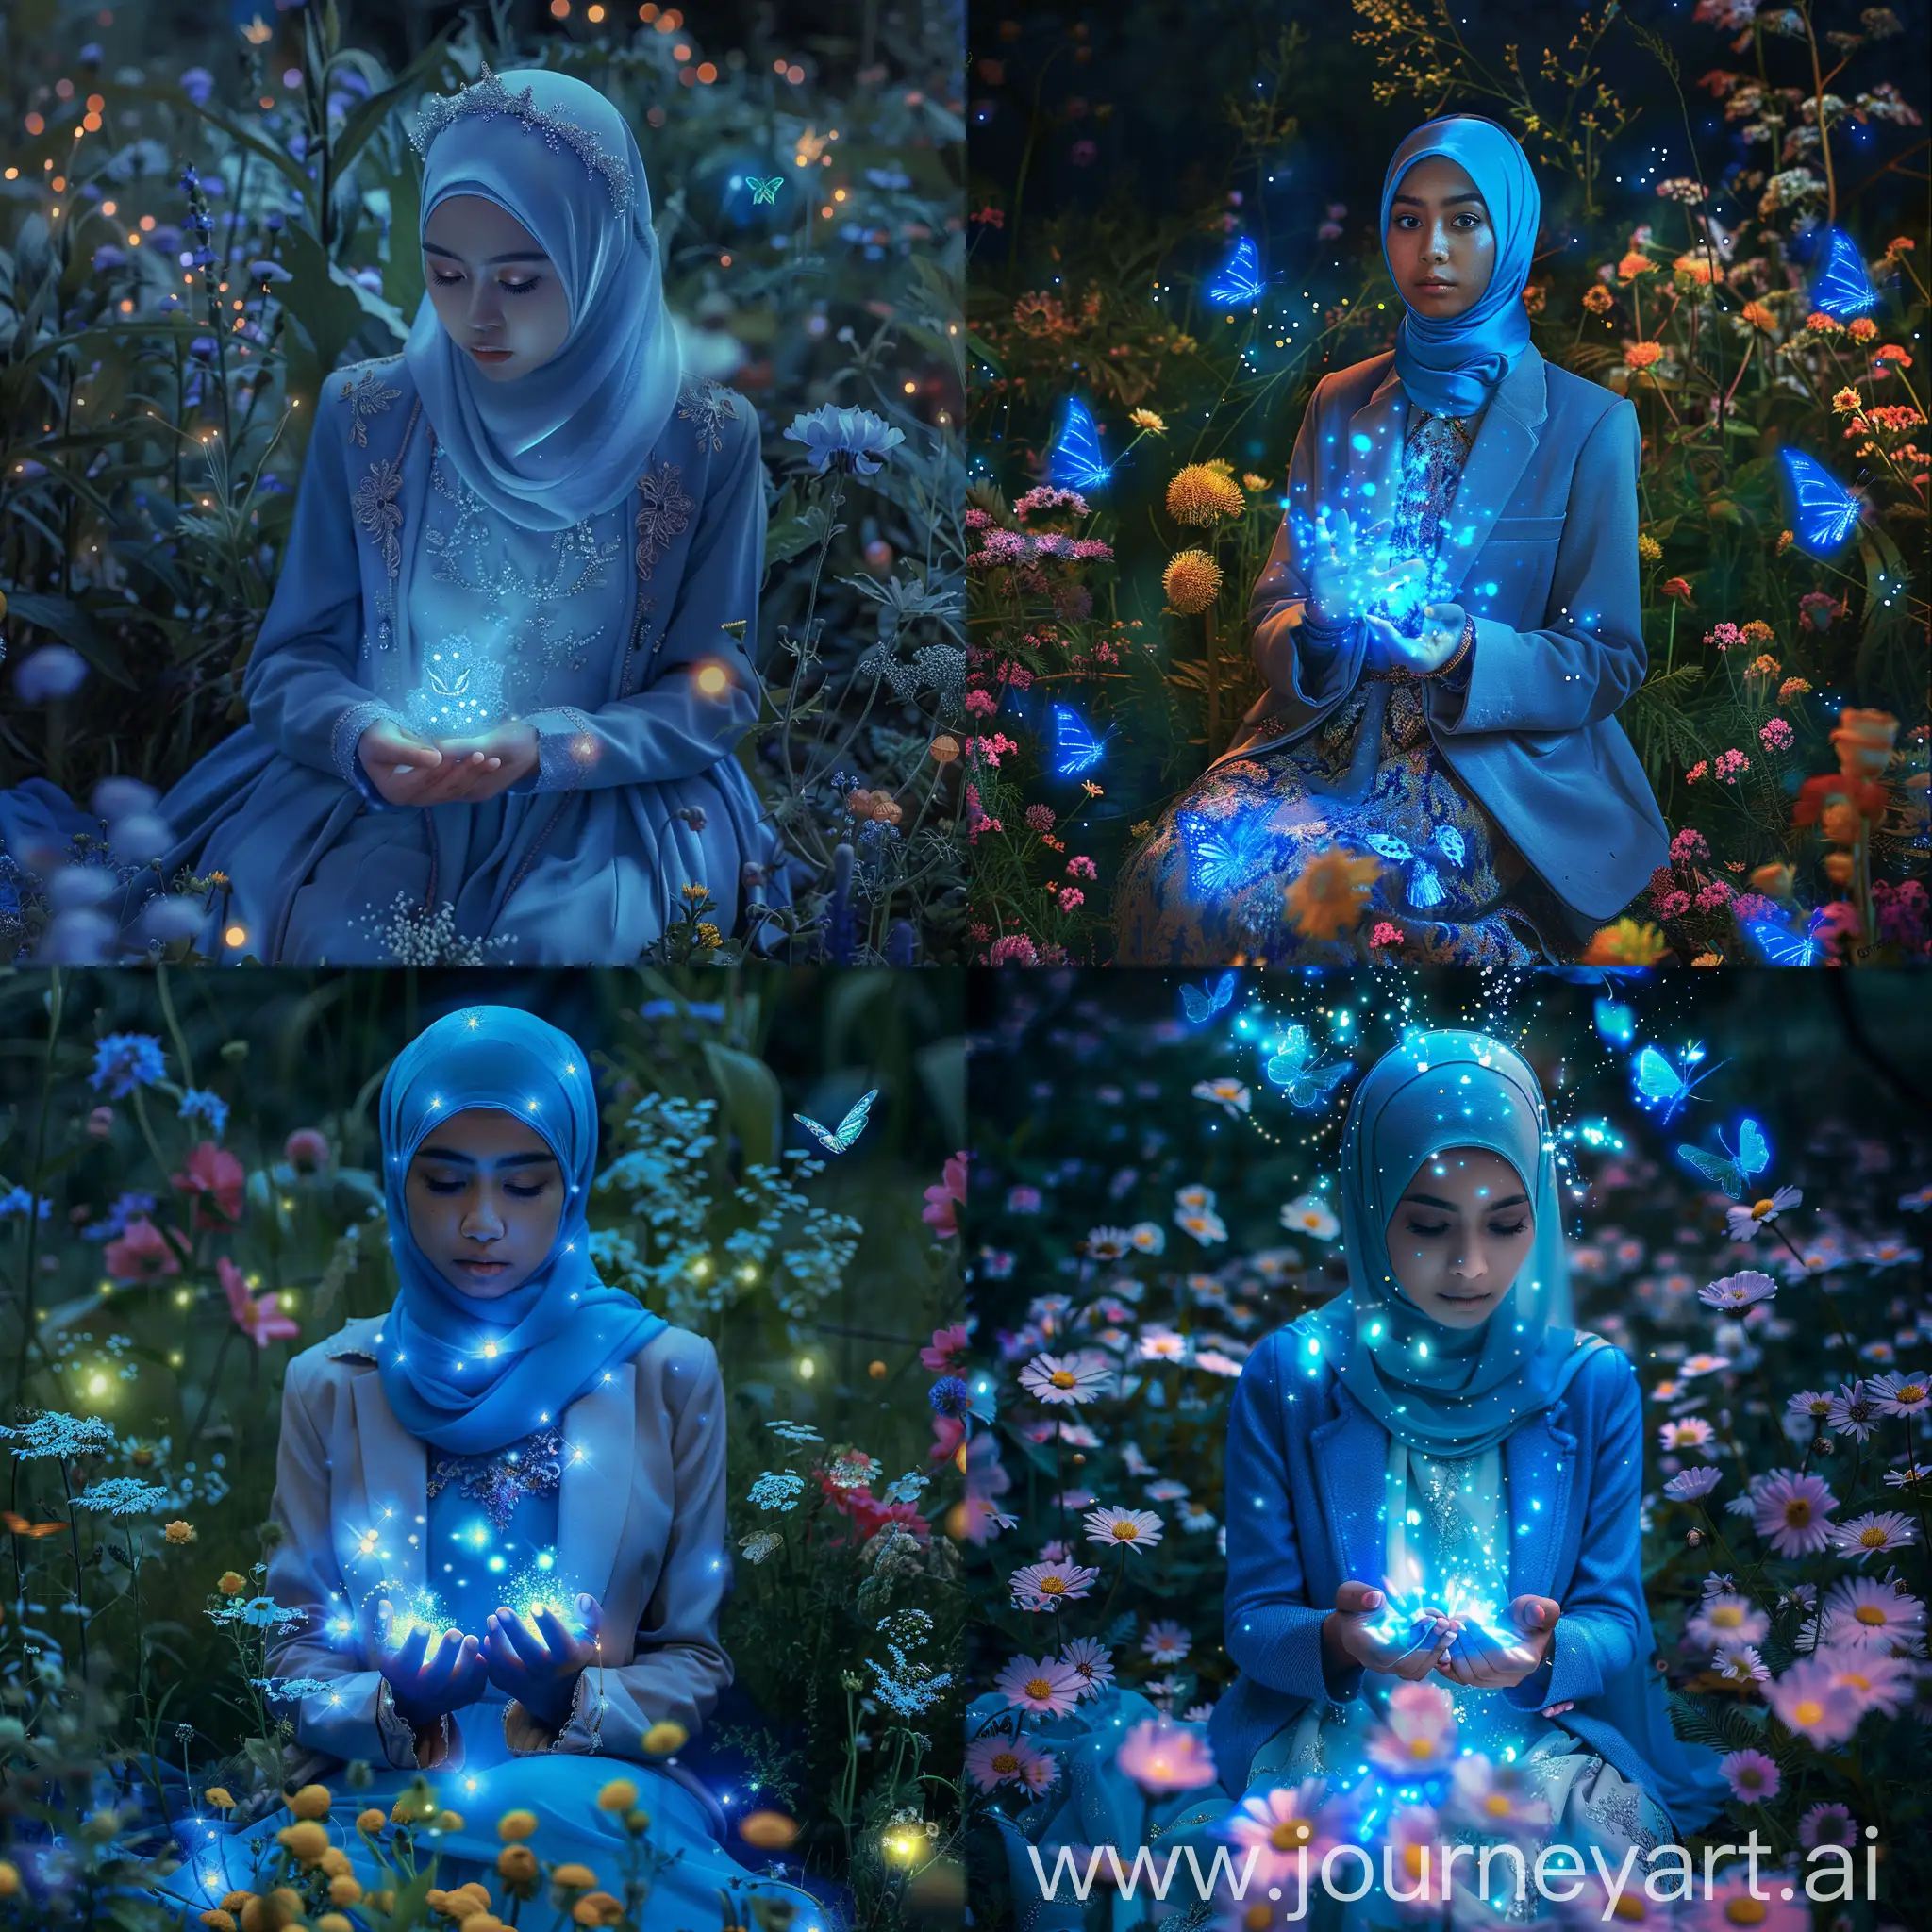 Elegant-Woman-in-Blue-Gown-and-Glowing-Hijab-Amid-Night-Garden